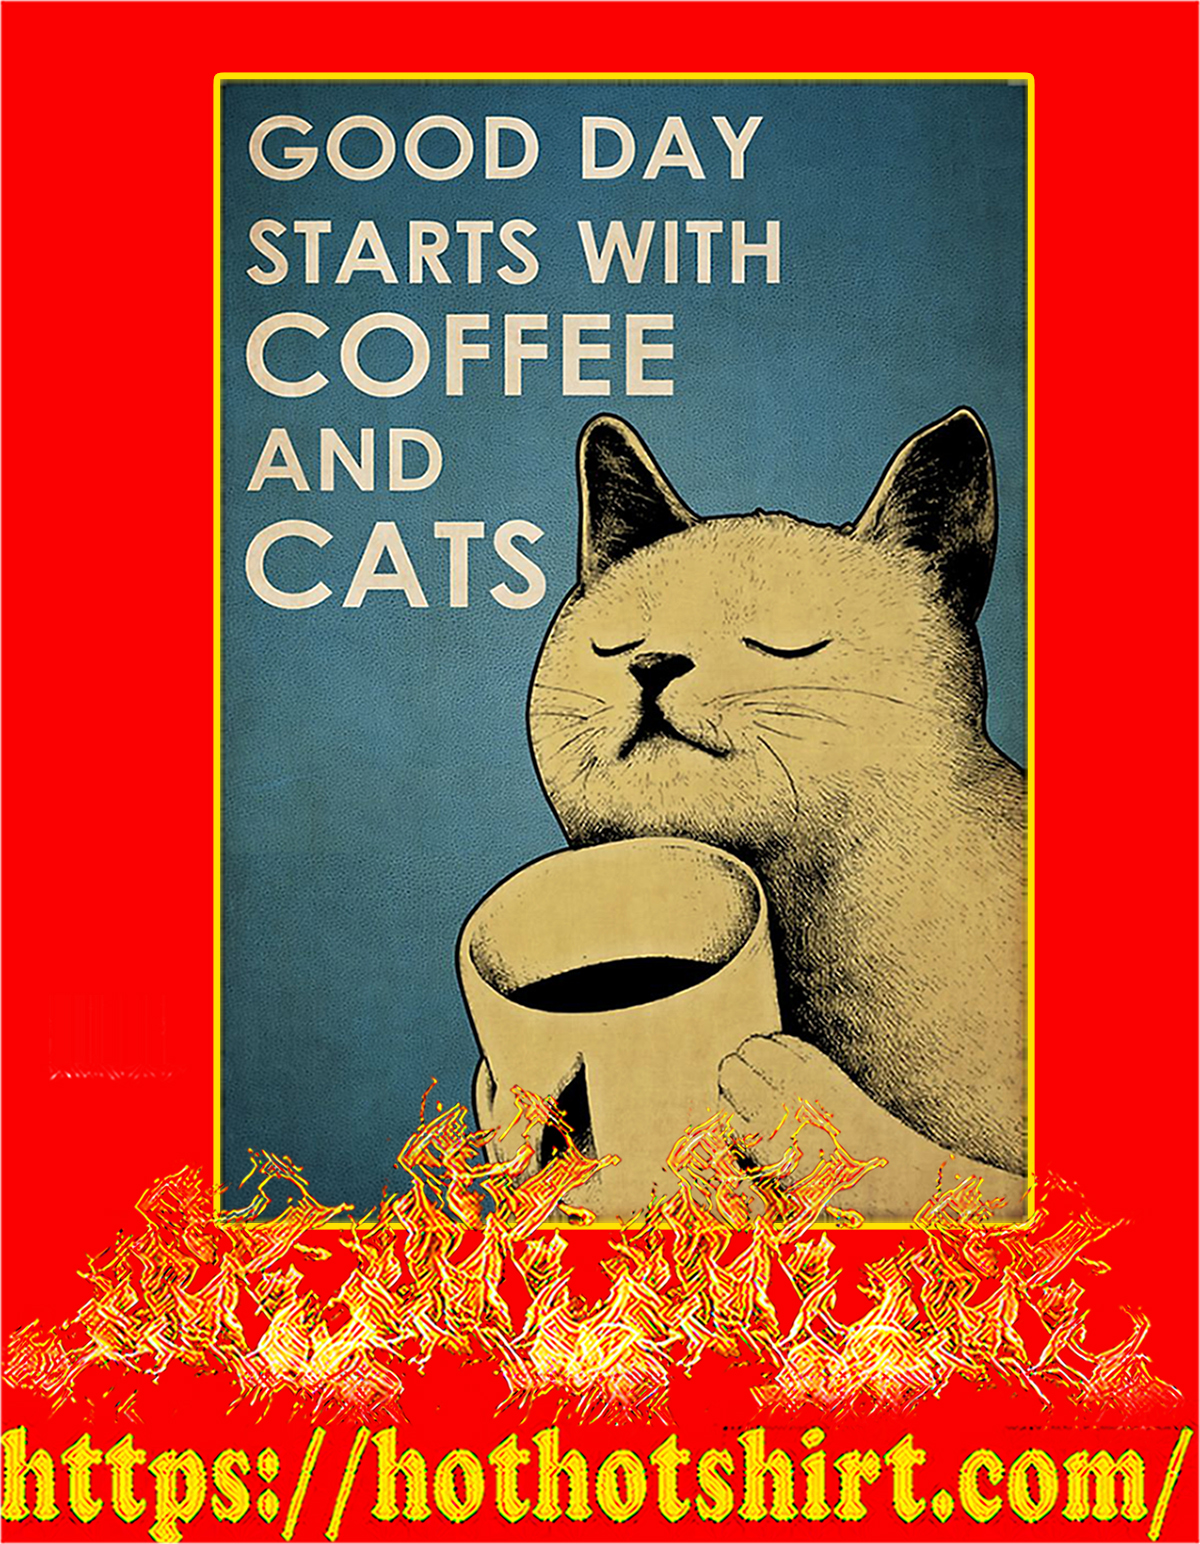 Good day starts with coffee and cats poster